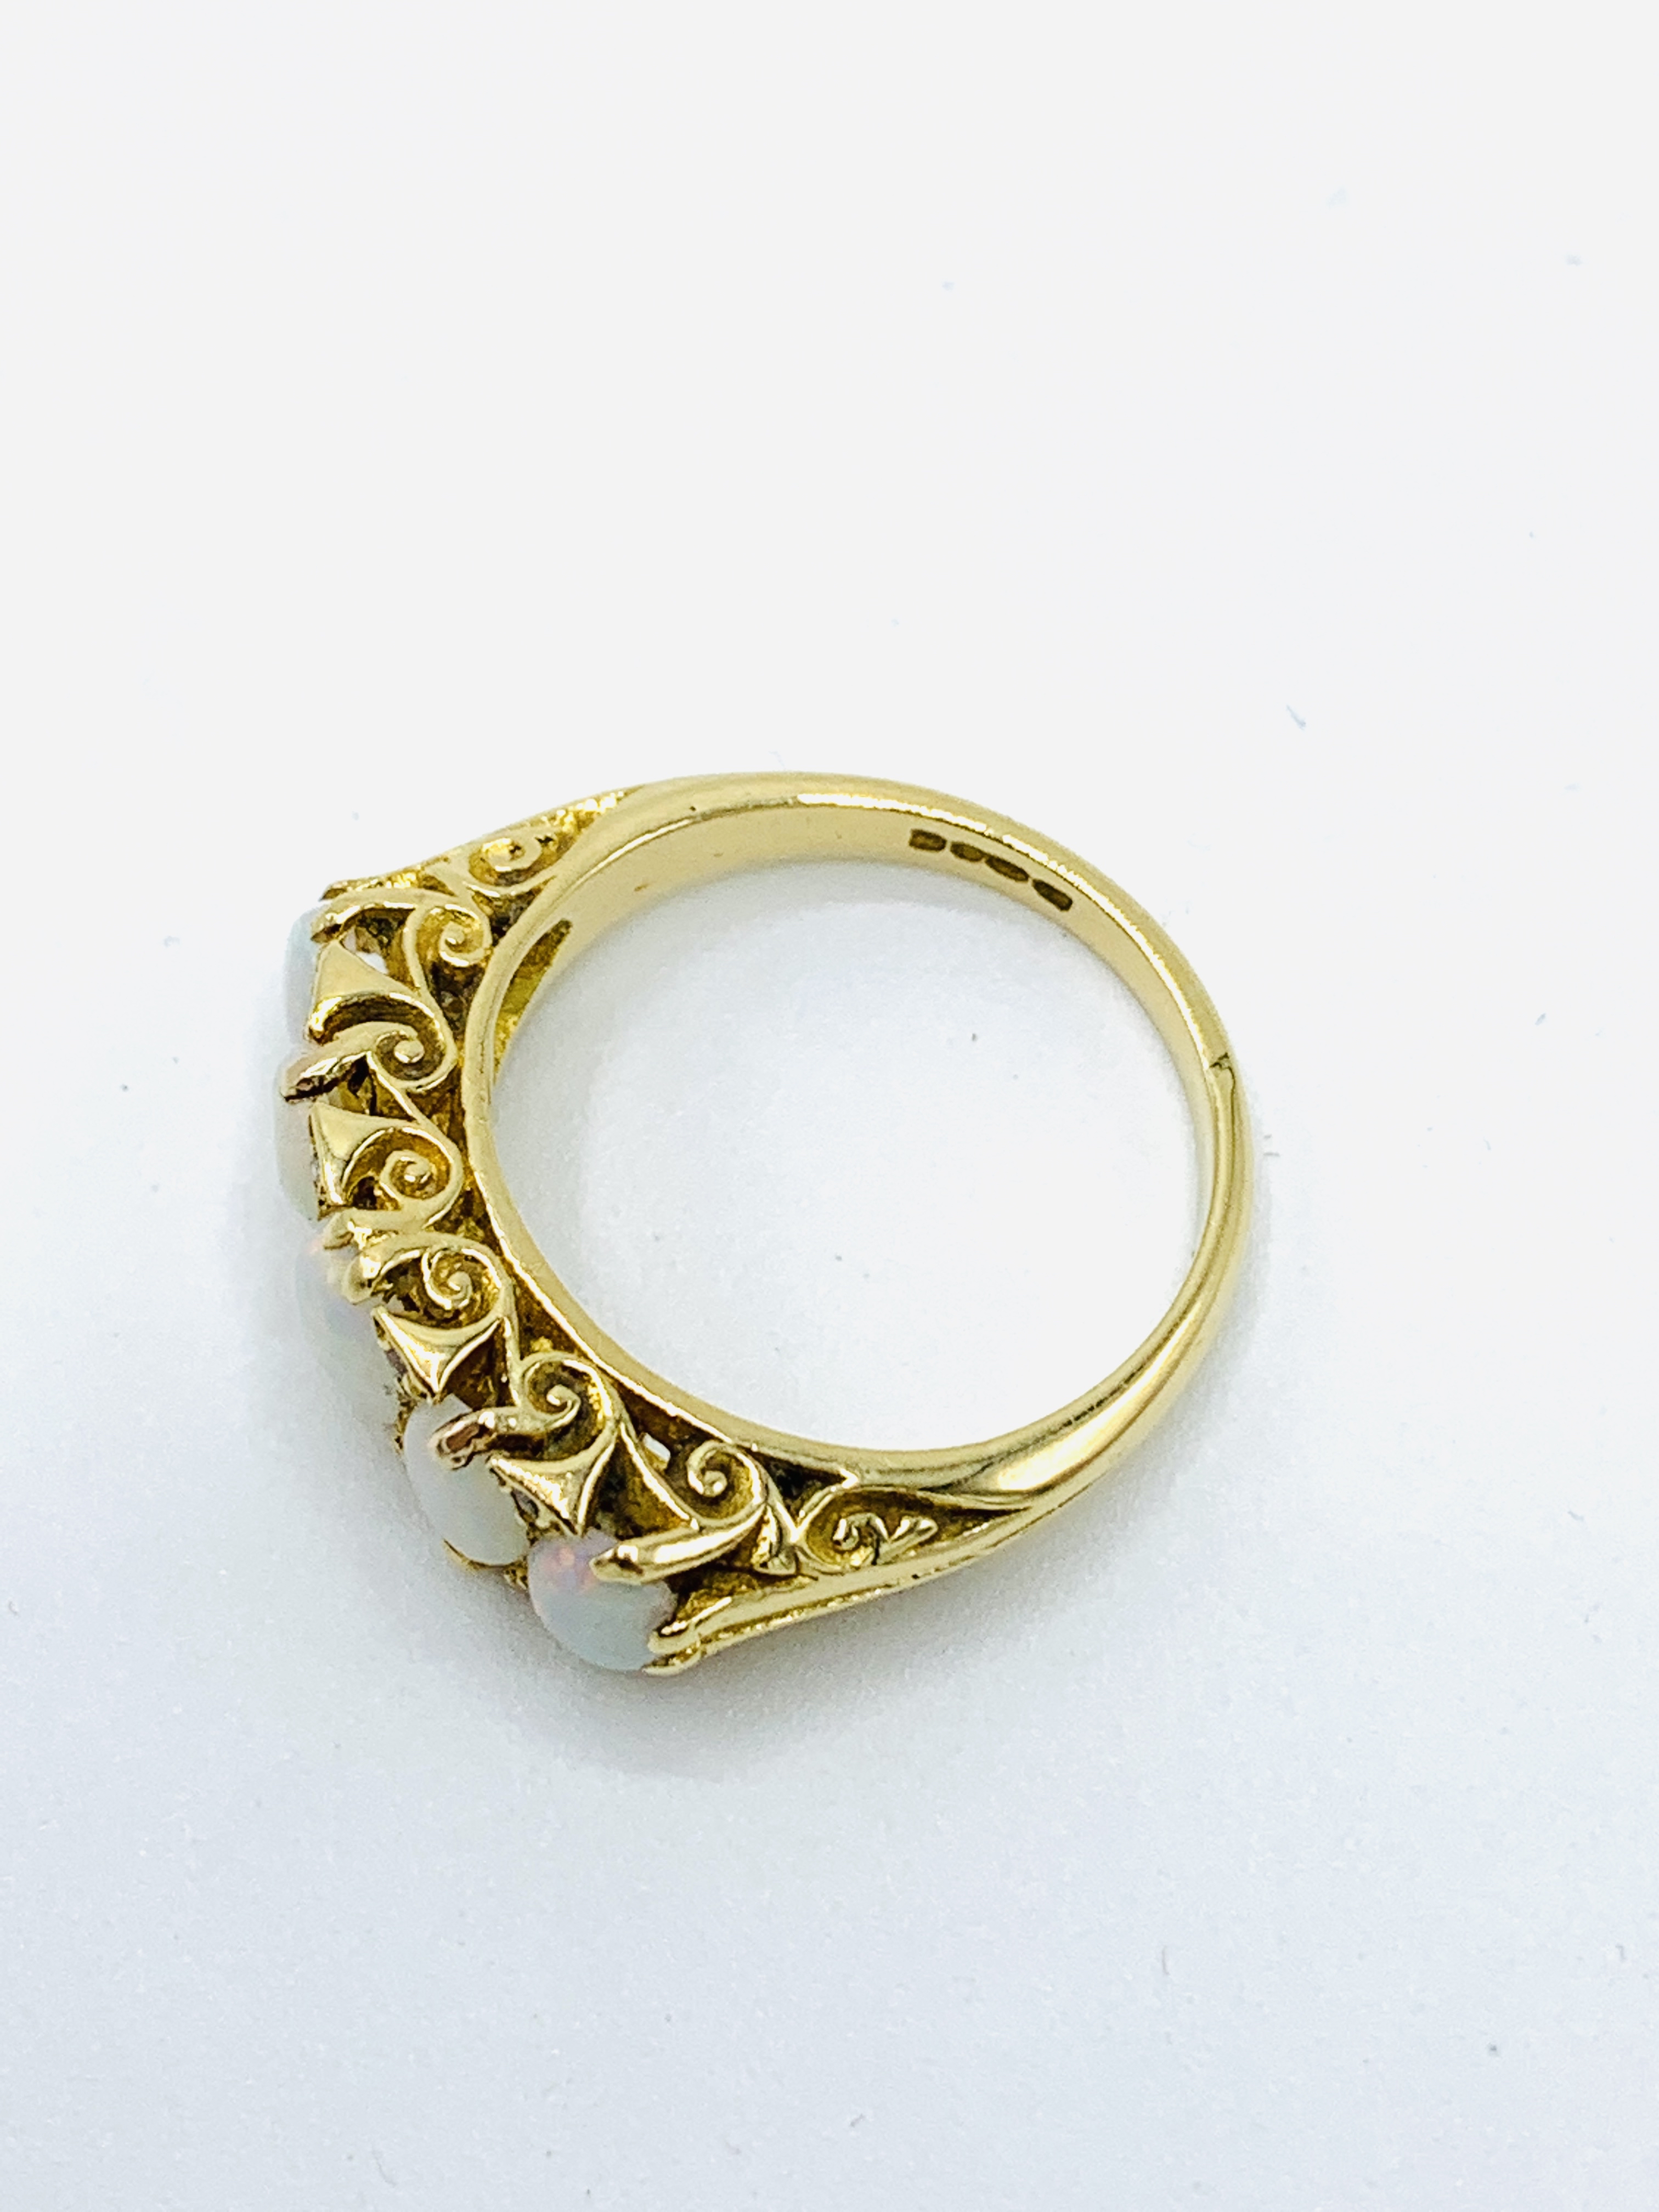 18ct yellow gold ring with five graduated opals in filigree setting - Image 3 of 4